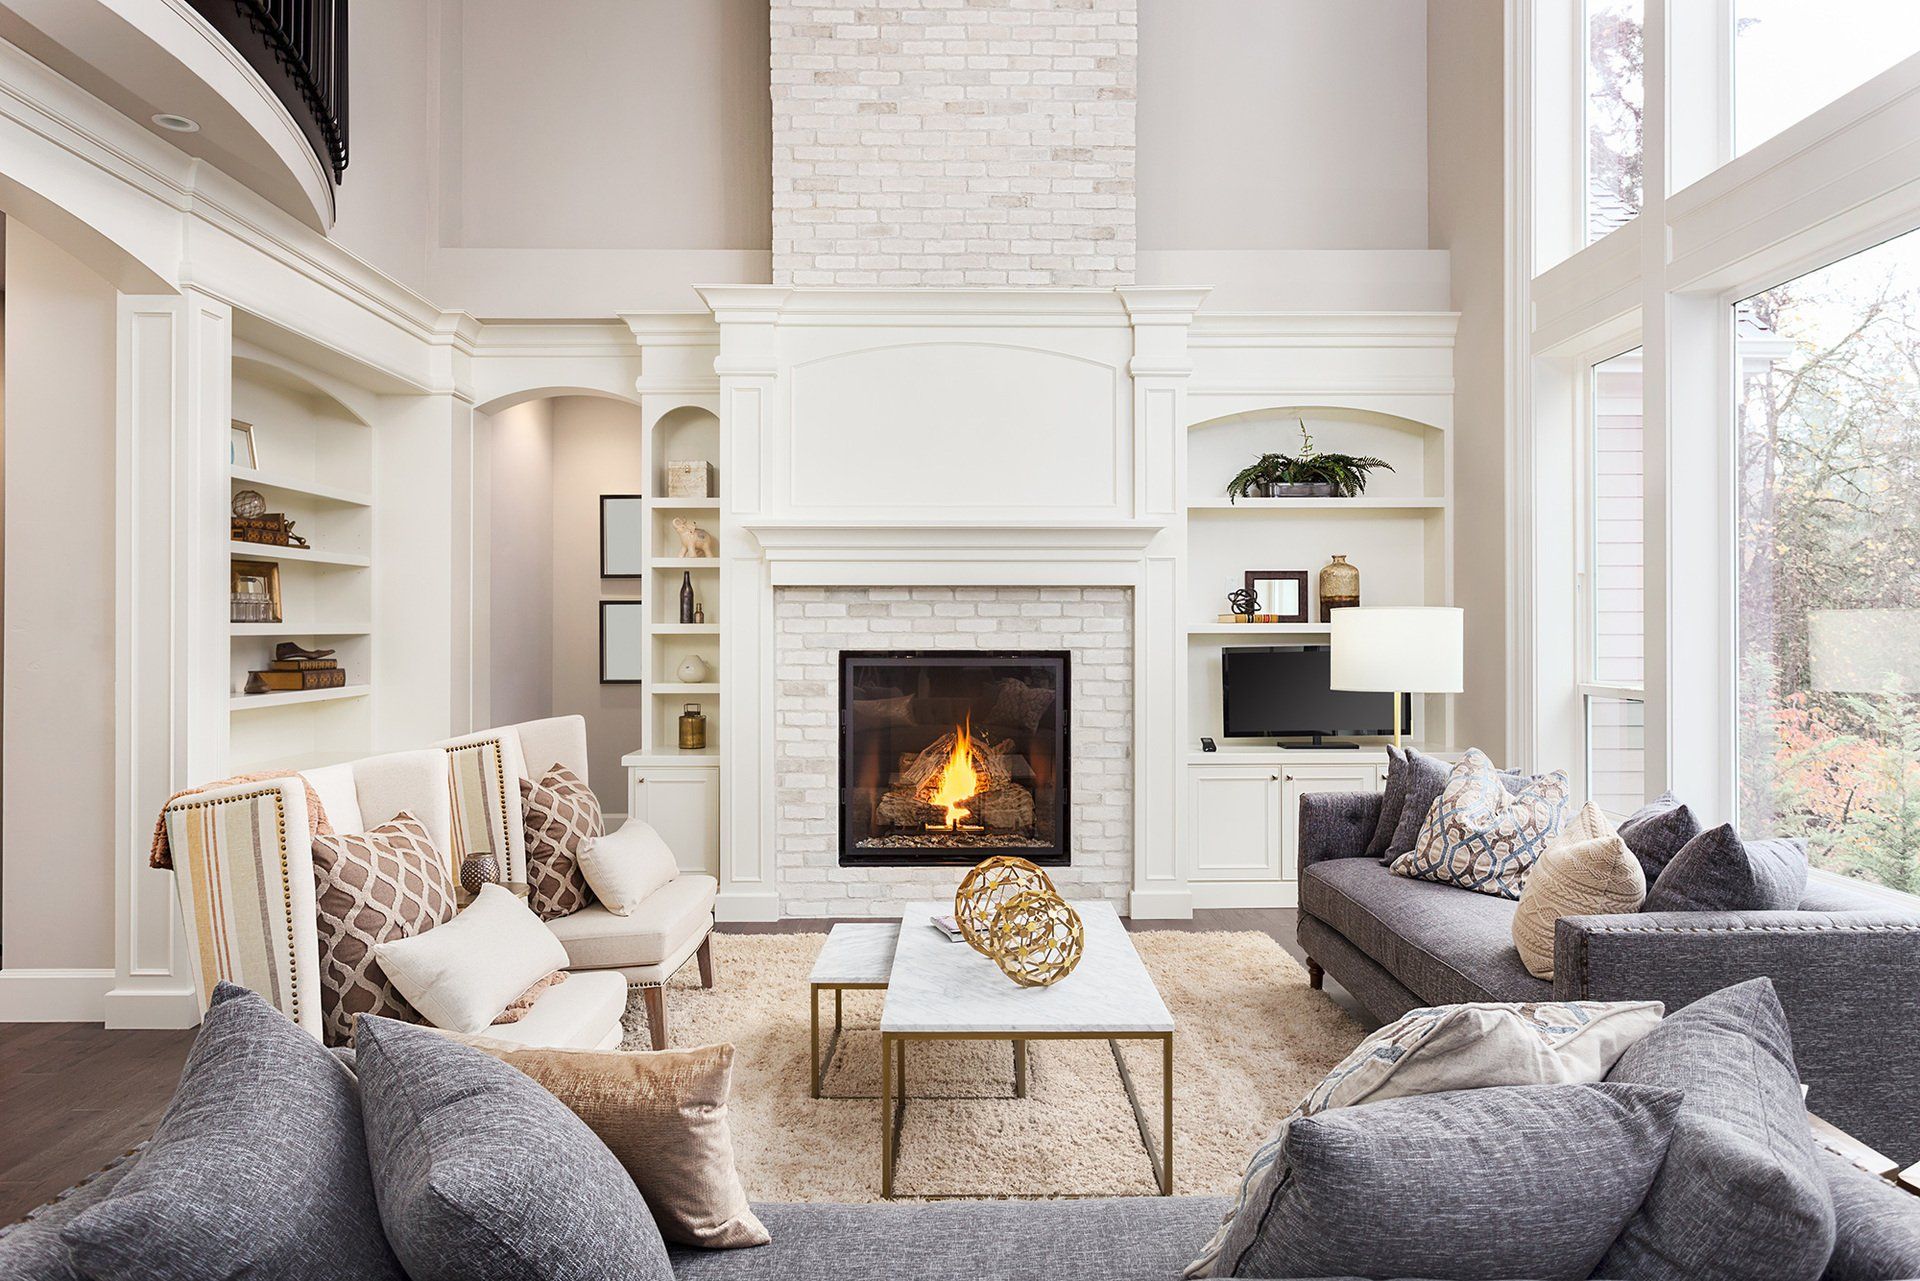 A living room filled with furniture and a fireplace.